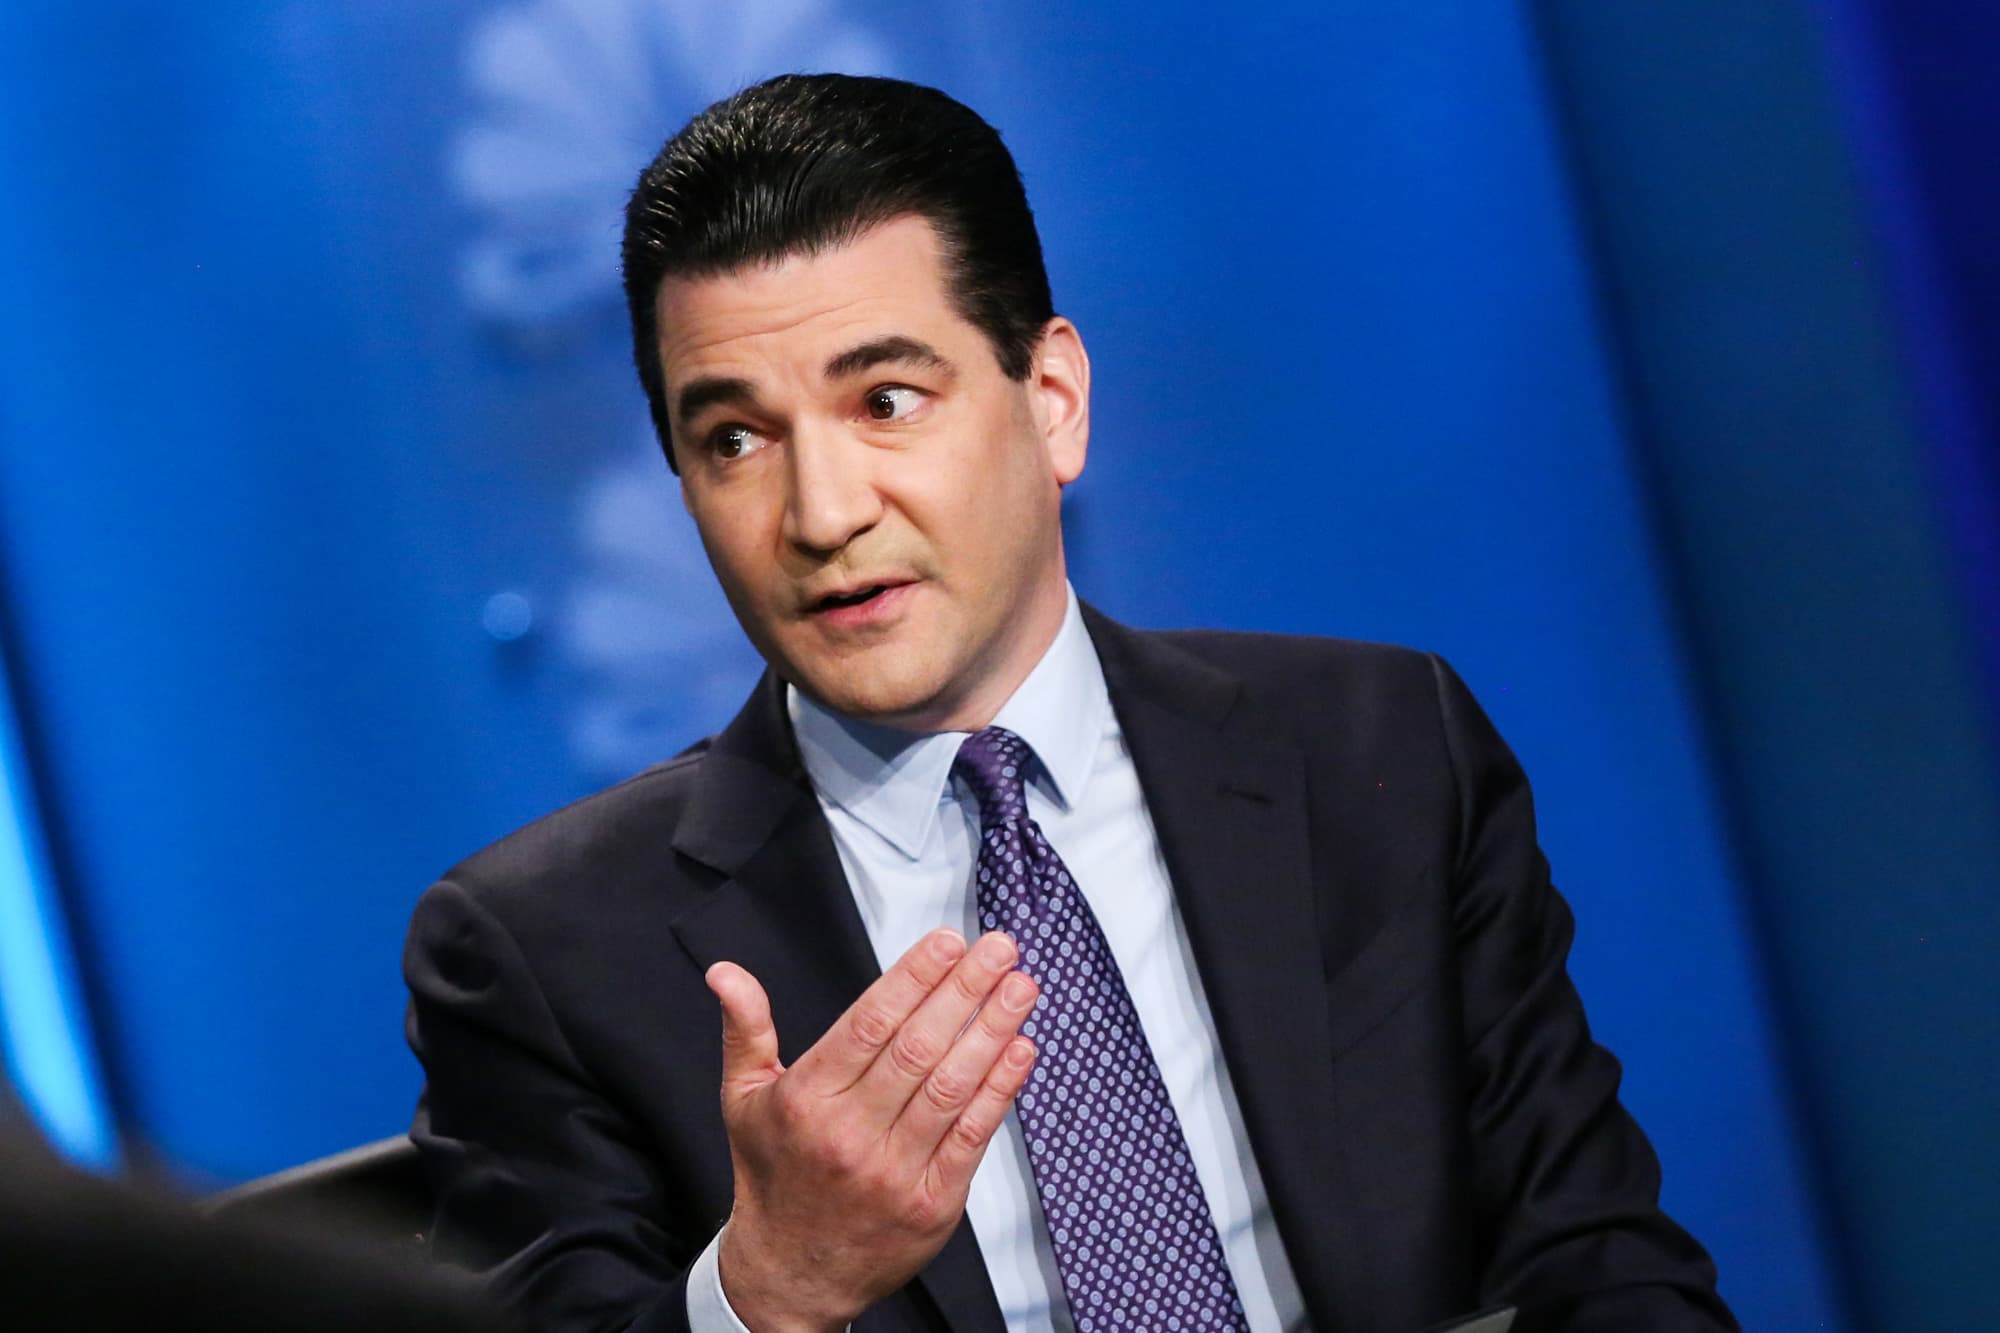 Dr. Scott Gottlieb: My kids won't wear Covid masks in school when mandate lifts later this month